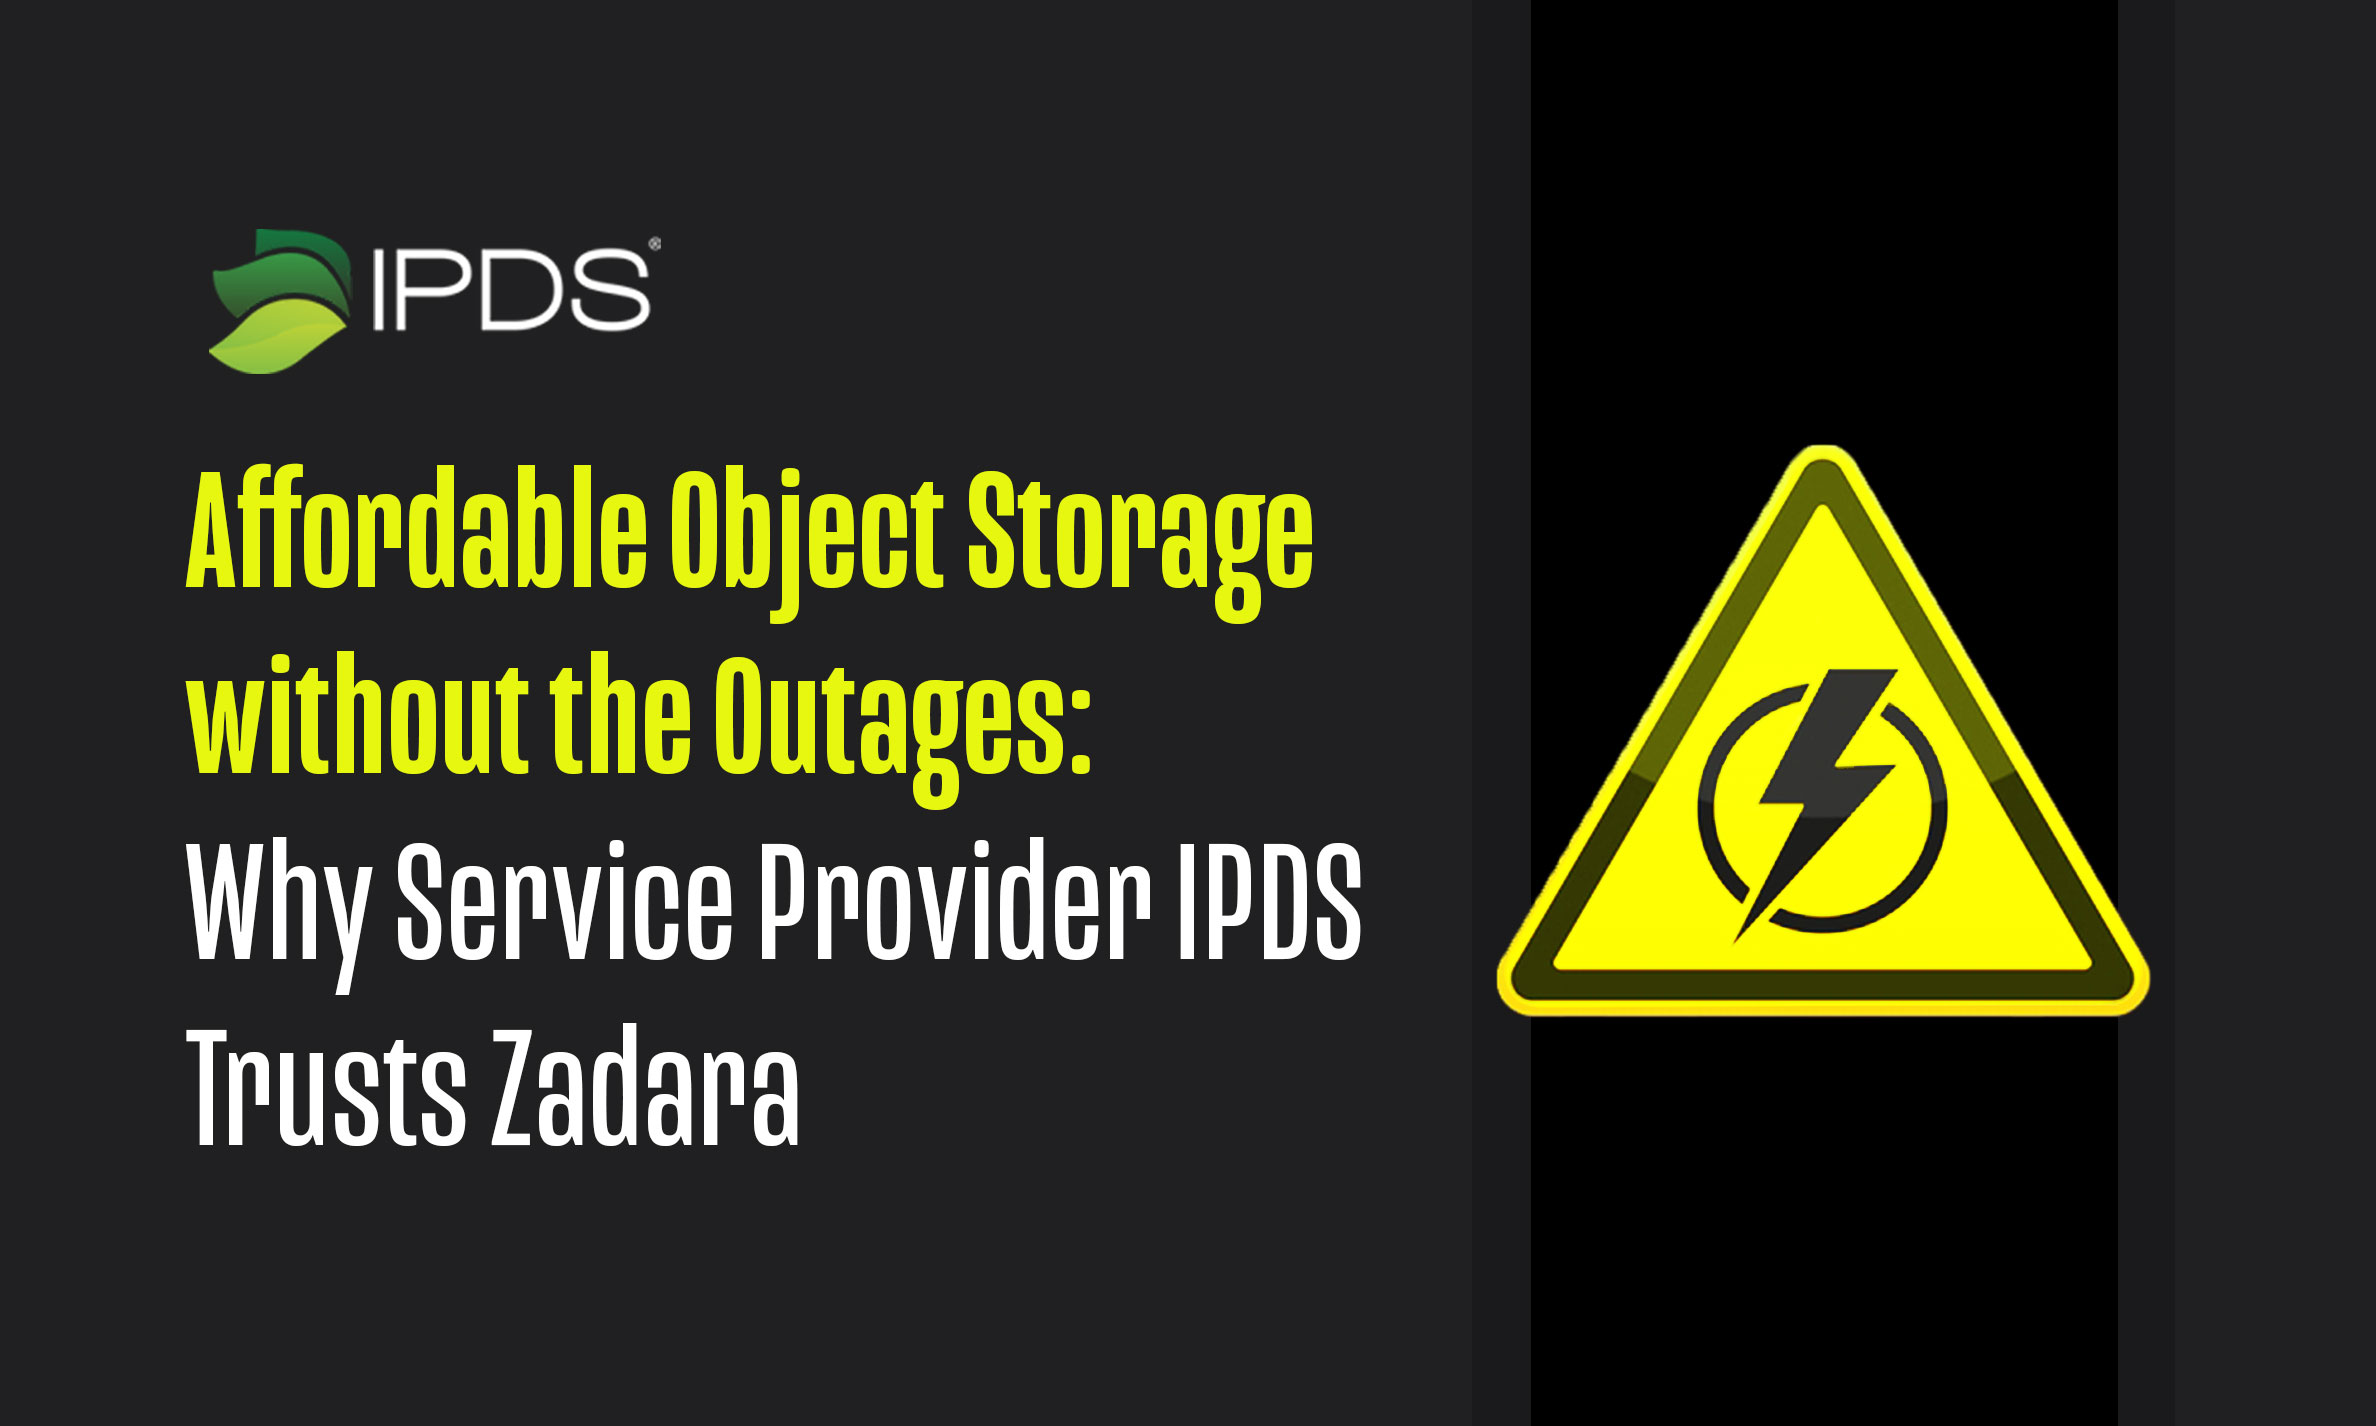 Affordable Object Storage without the Outages: Why Service Provider IPDS Trusts Zadara